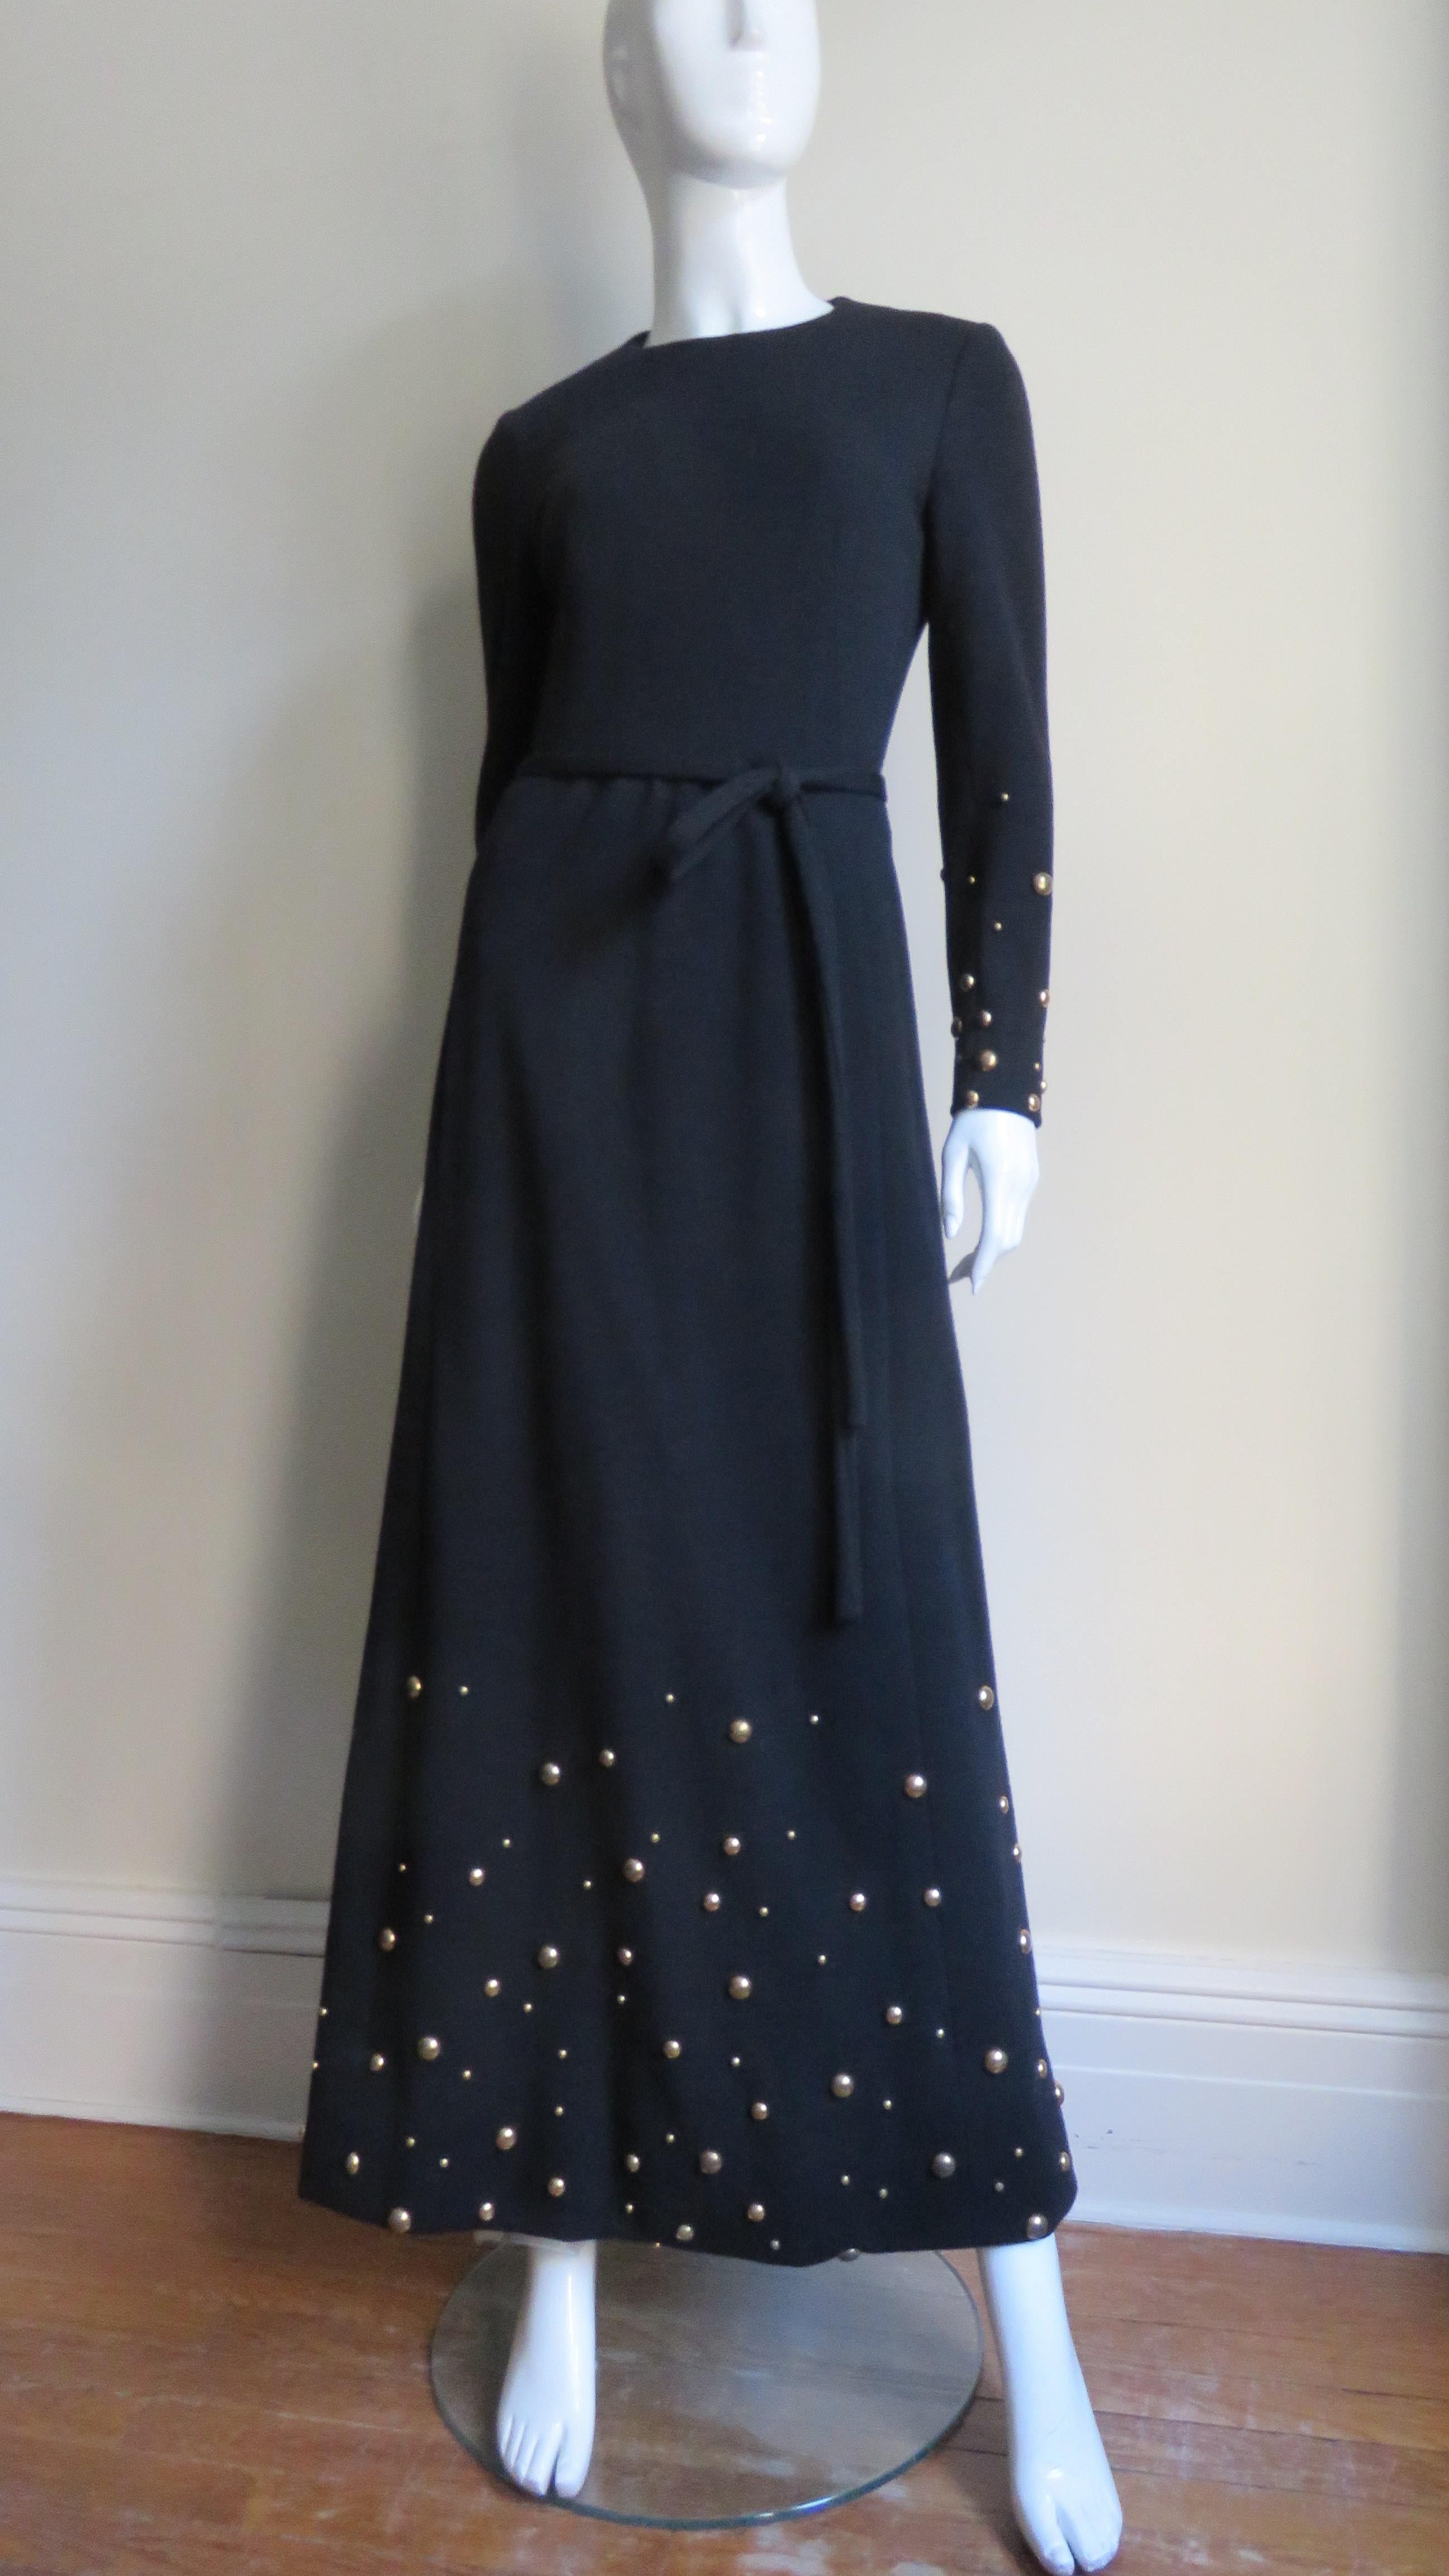 A fabulous black wool jersey maxi dress and wrap from Givenchy.  It has long sleeves, a crew neckline and comes with a narrow tie belt and matching wrap.  The lower sleeves and skirt portion plus the matching triangular wrap are all adorned with